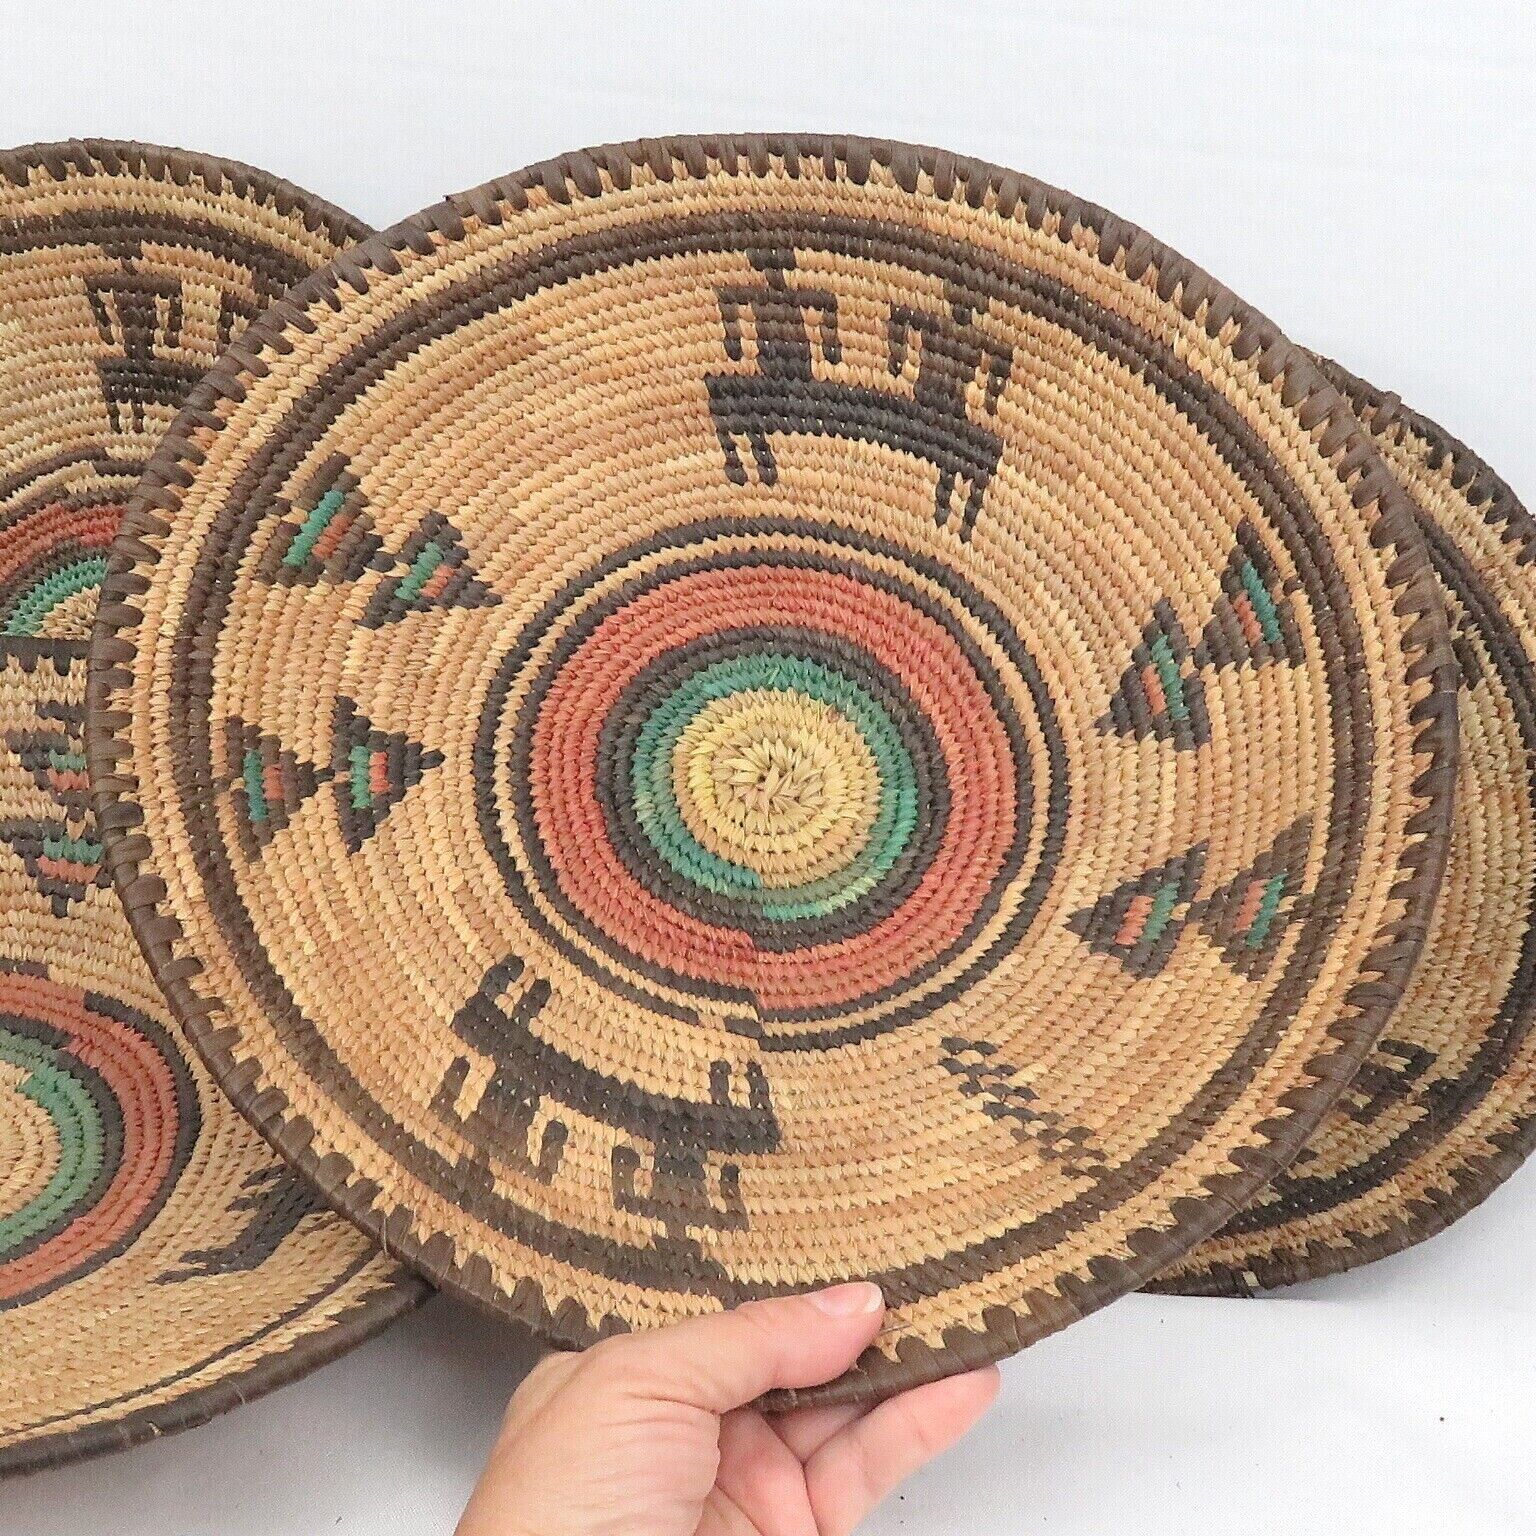 African Nigerian Hausa Coiled Pictorial Polychrome Baskets 12.5 \